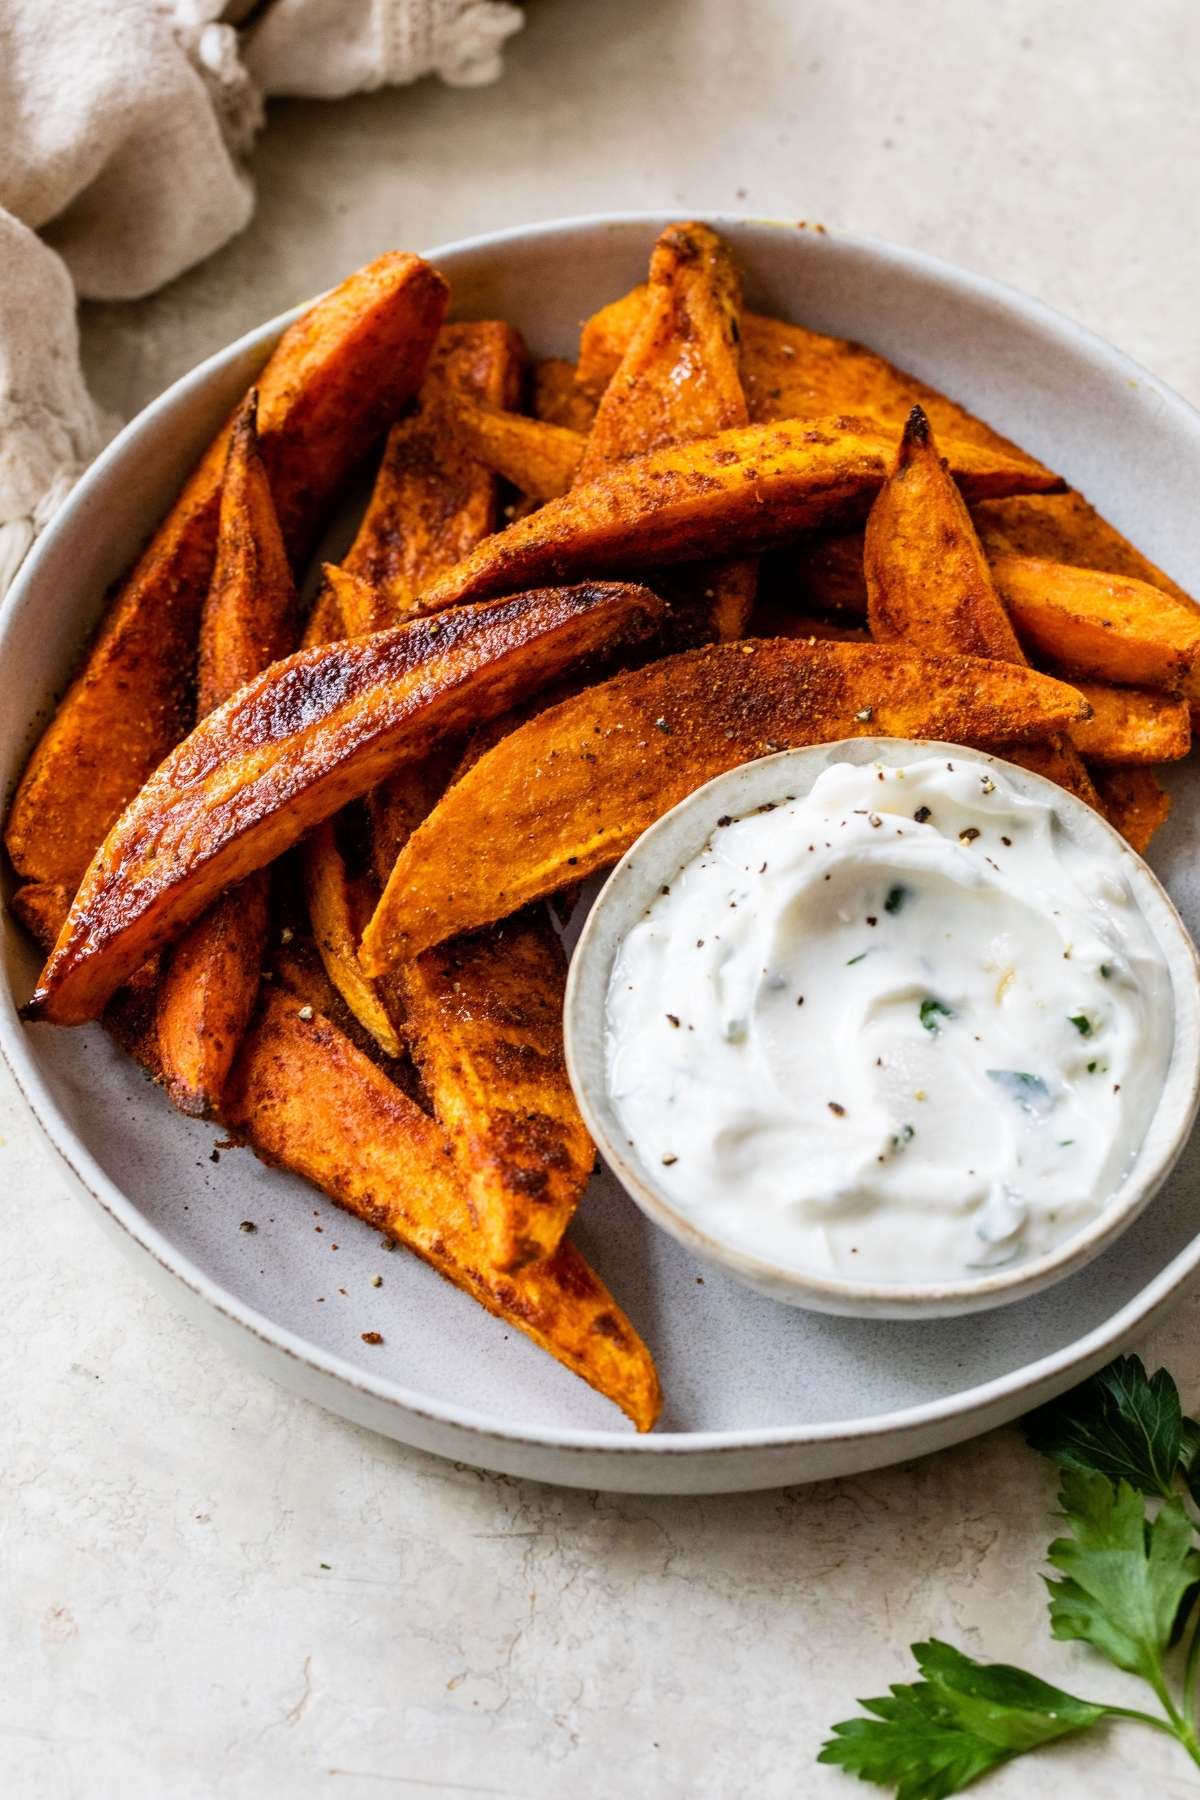 Roasted sweet potatoes served with dipping sauce on a white plate.